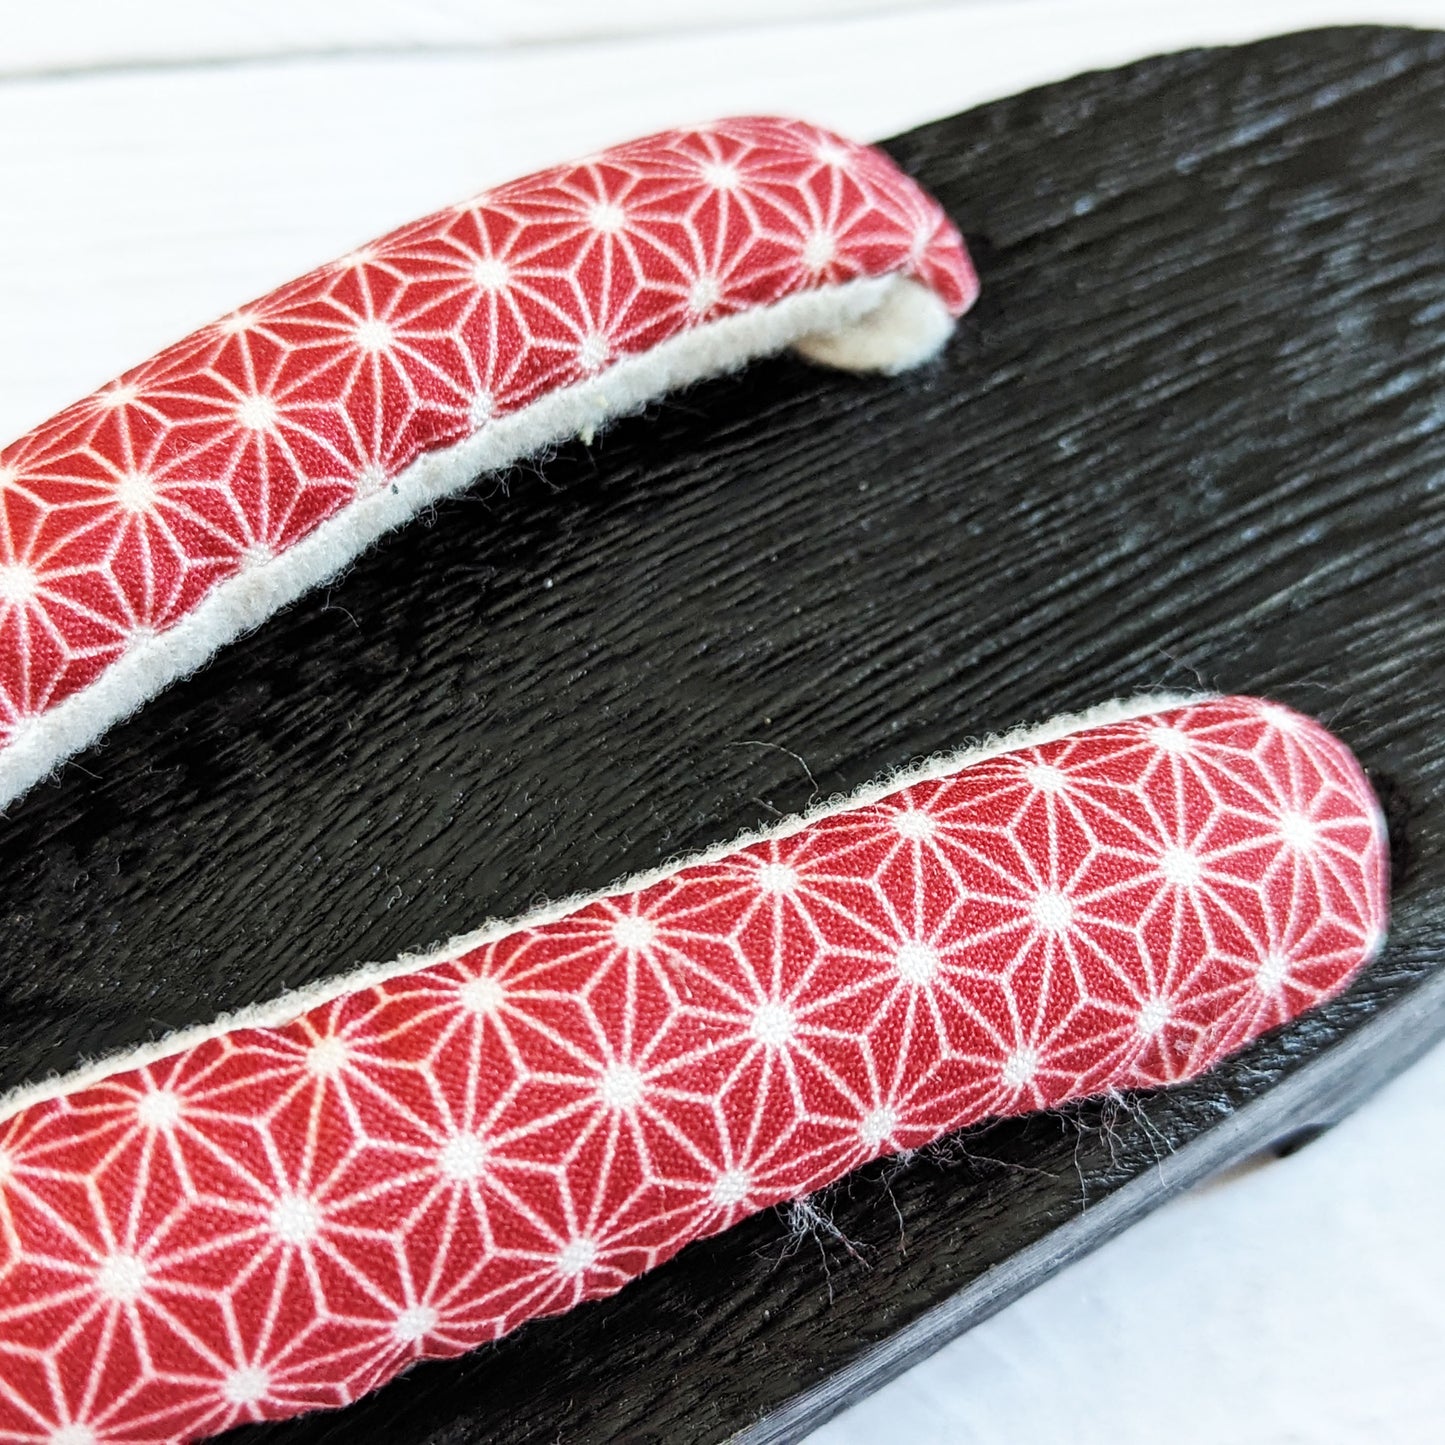 Japanese Geta Sandals - Patterned Red